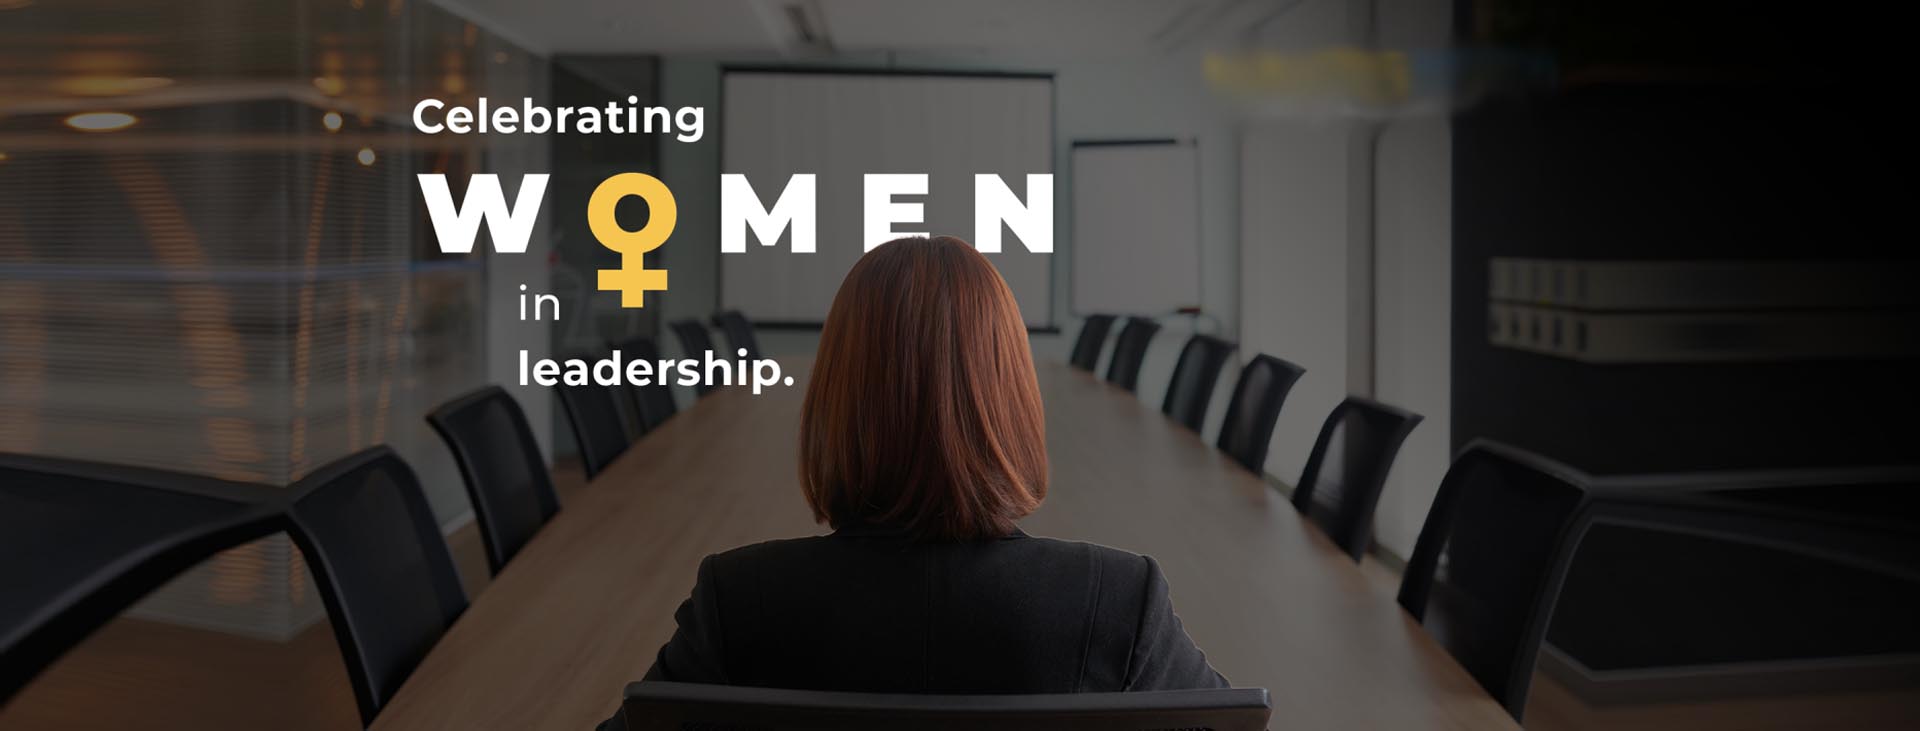 Mentoring Matters - Celebrating Women Who Lead: Insights on Leadership and Coaching